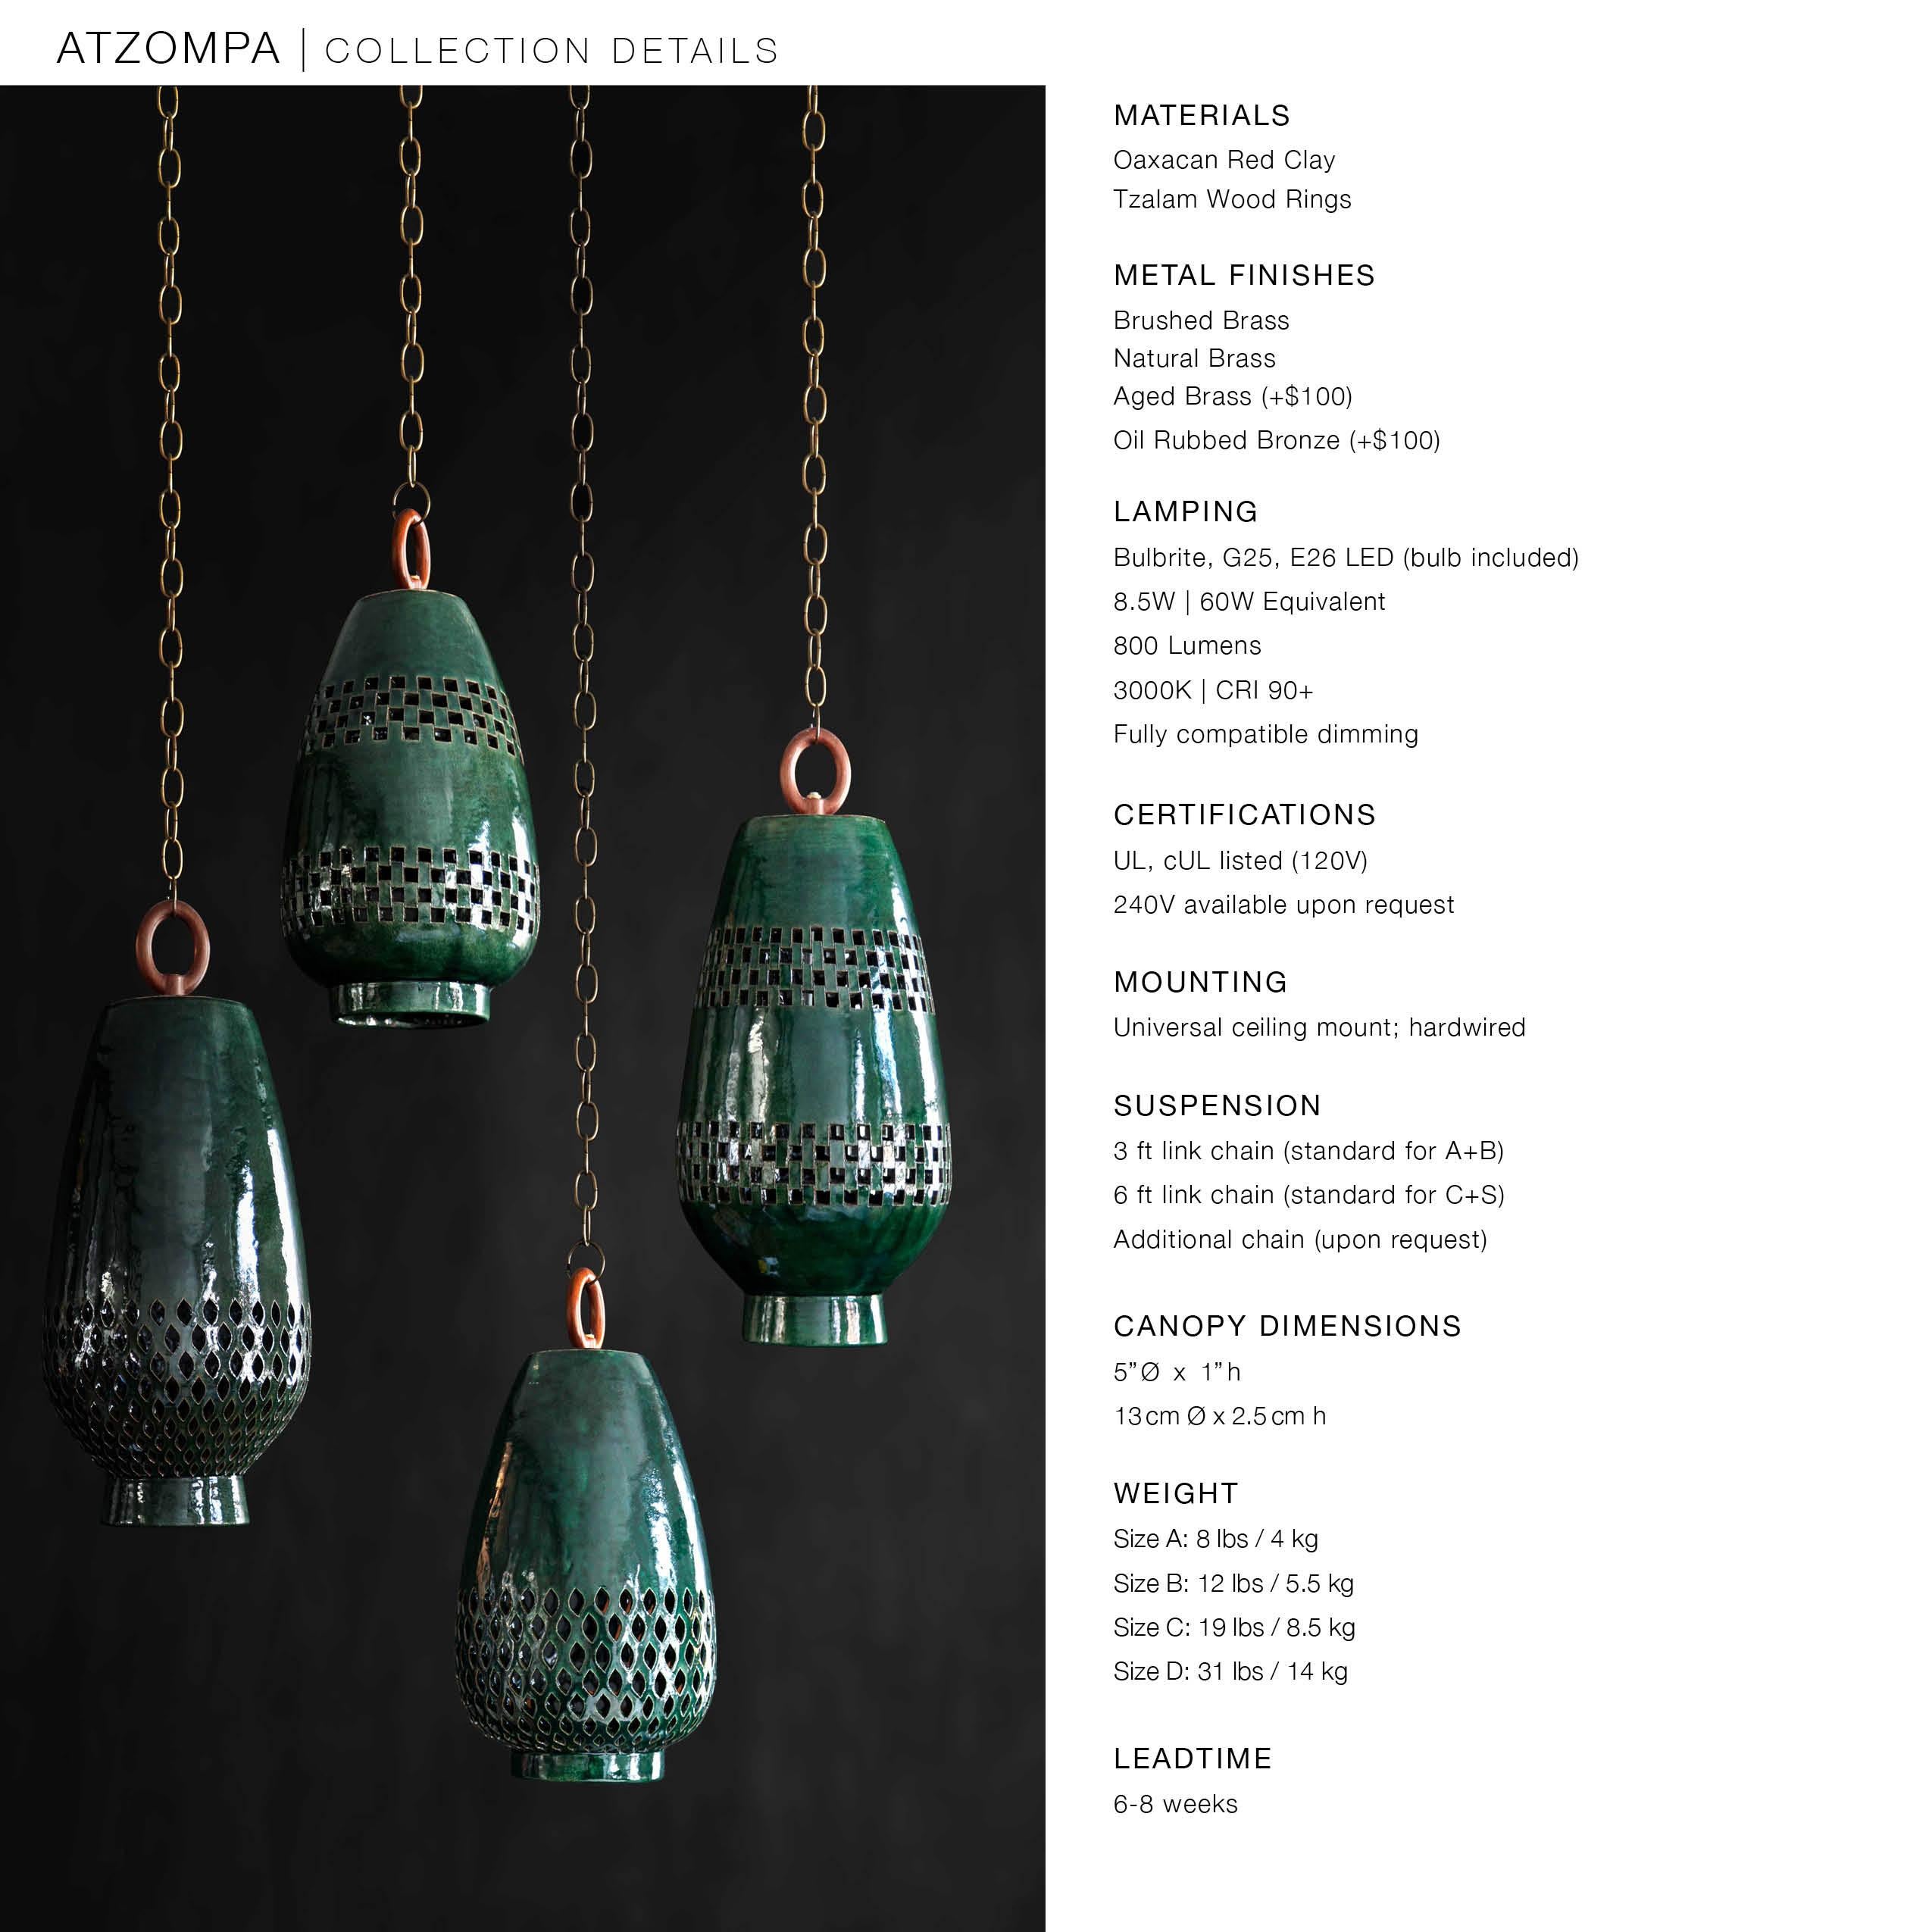 Medium Emerald Ceramic Pendant Light, Aged Brass, Ajedrez Atzompa Collection In New Condition For Sale In New York, NY